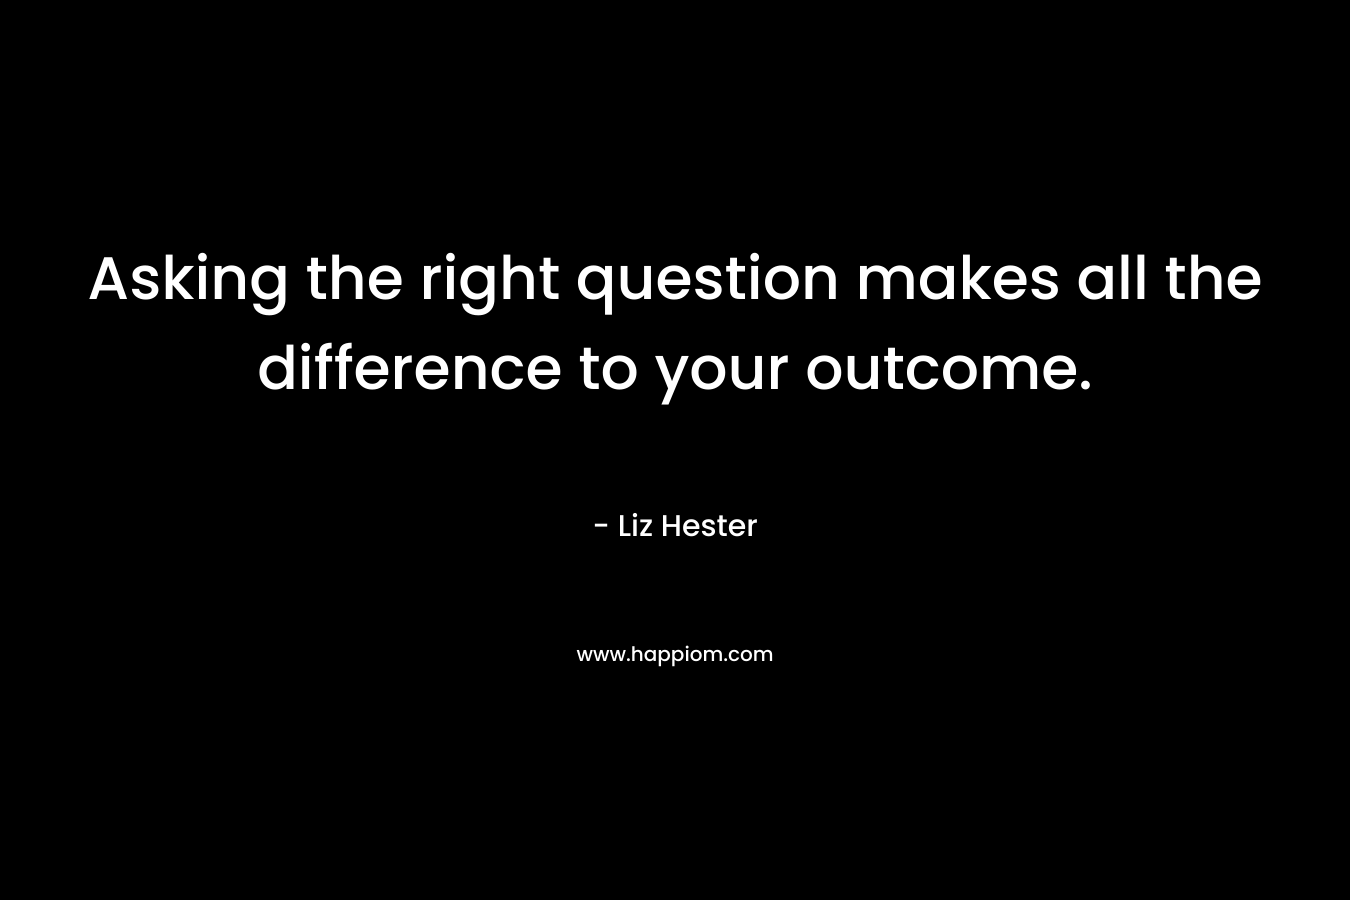 Asking the right question makes all the difference to your outcome. – Liz Hester